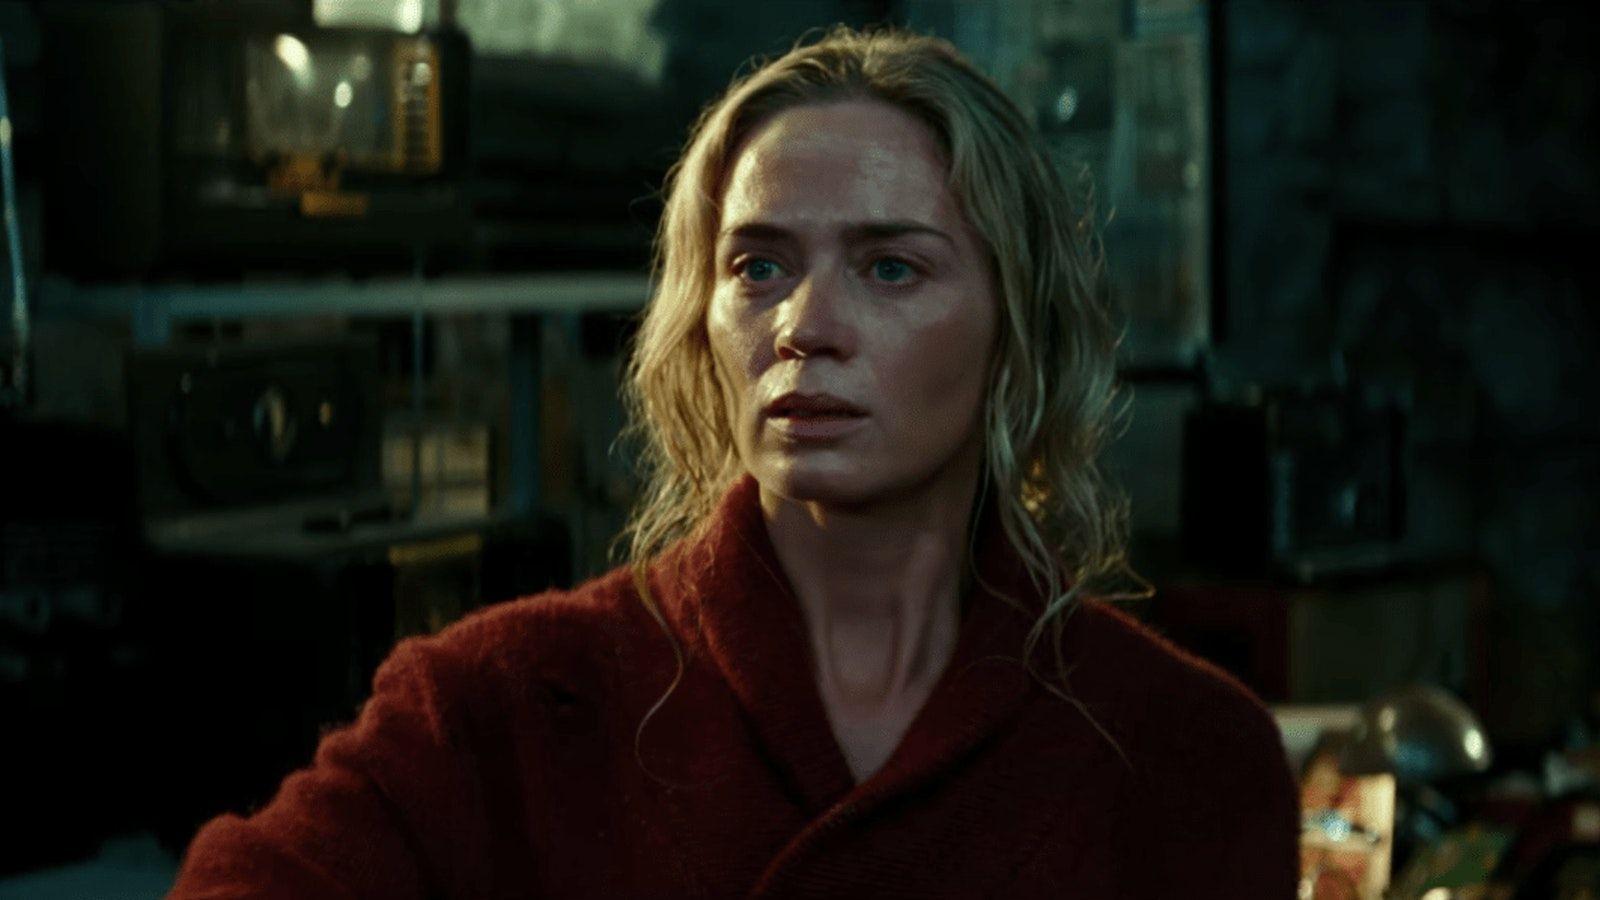 Could 'A Quiet Place' Be Somewhere in the Cloverfield Universe